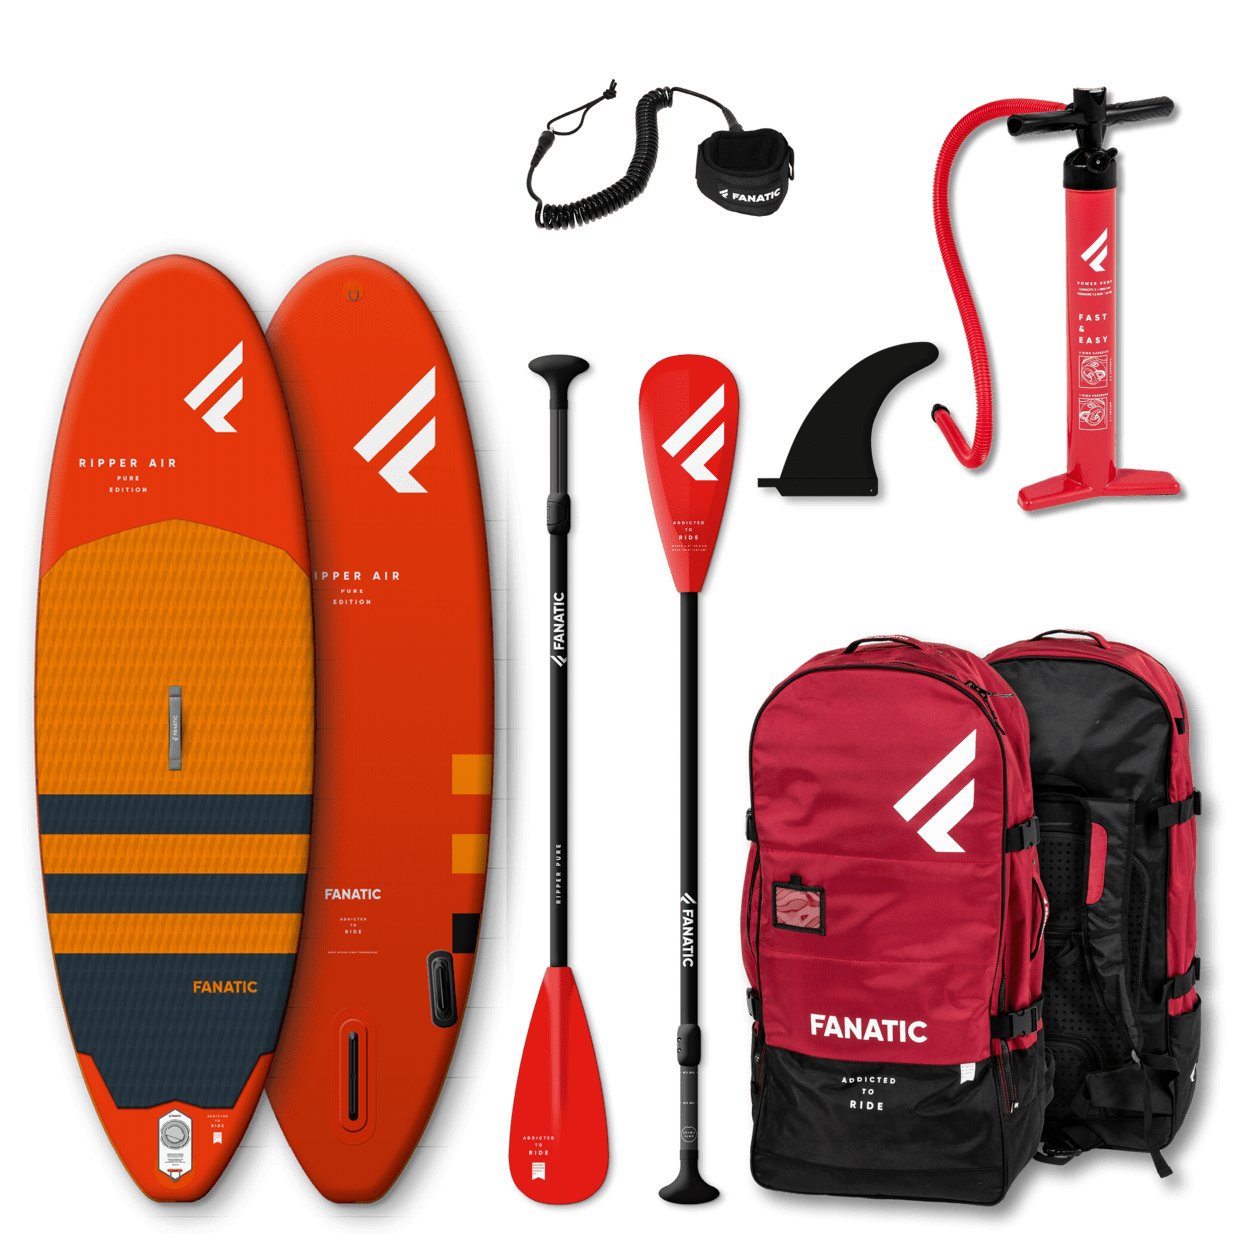 Fanatic Package Ripper Air 2022 iSUP Paddleboard - Worthing Watersports - 9008415938575 - iSUP Packages - Fanatic SUP